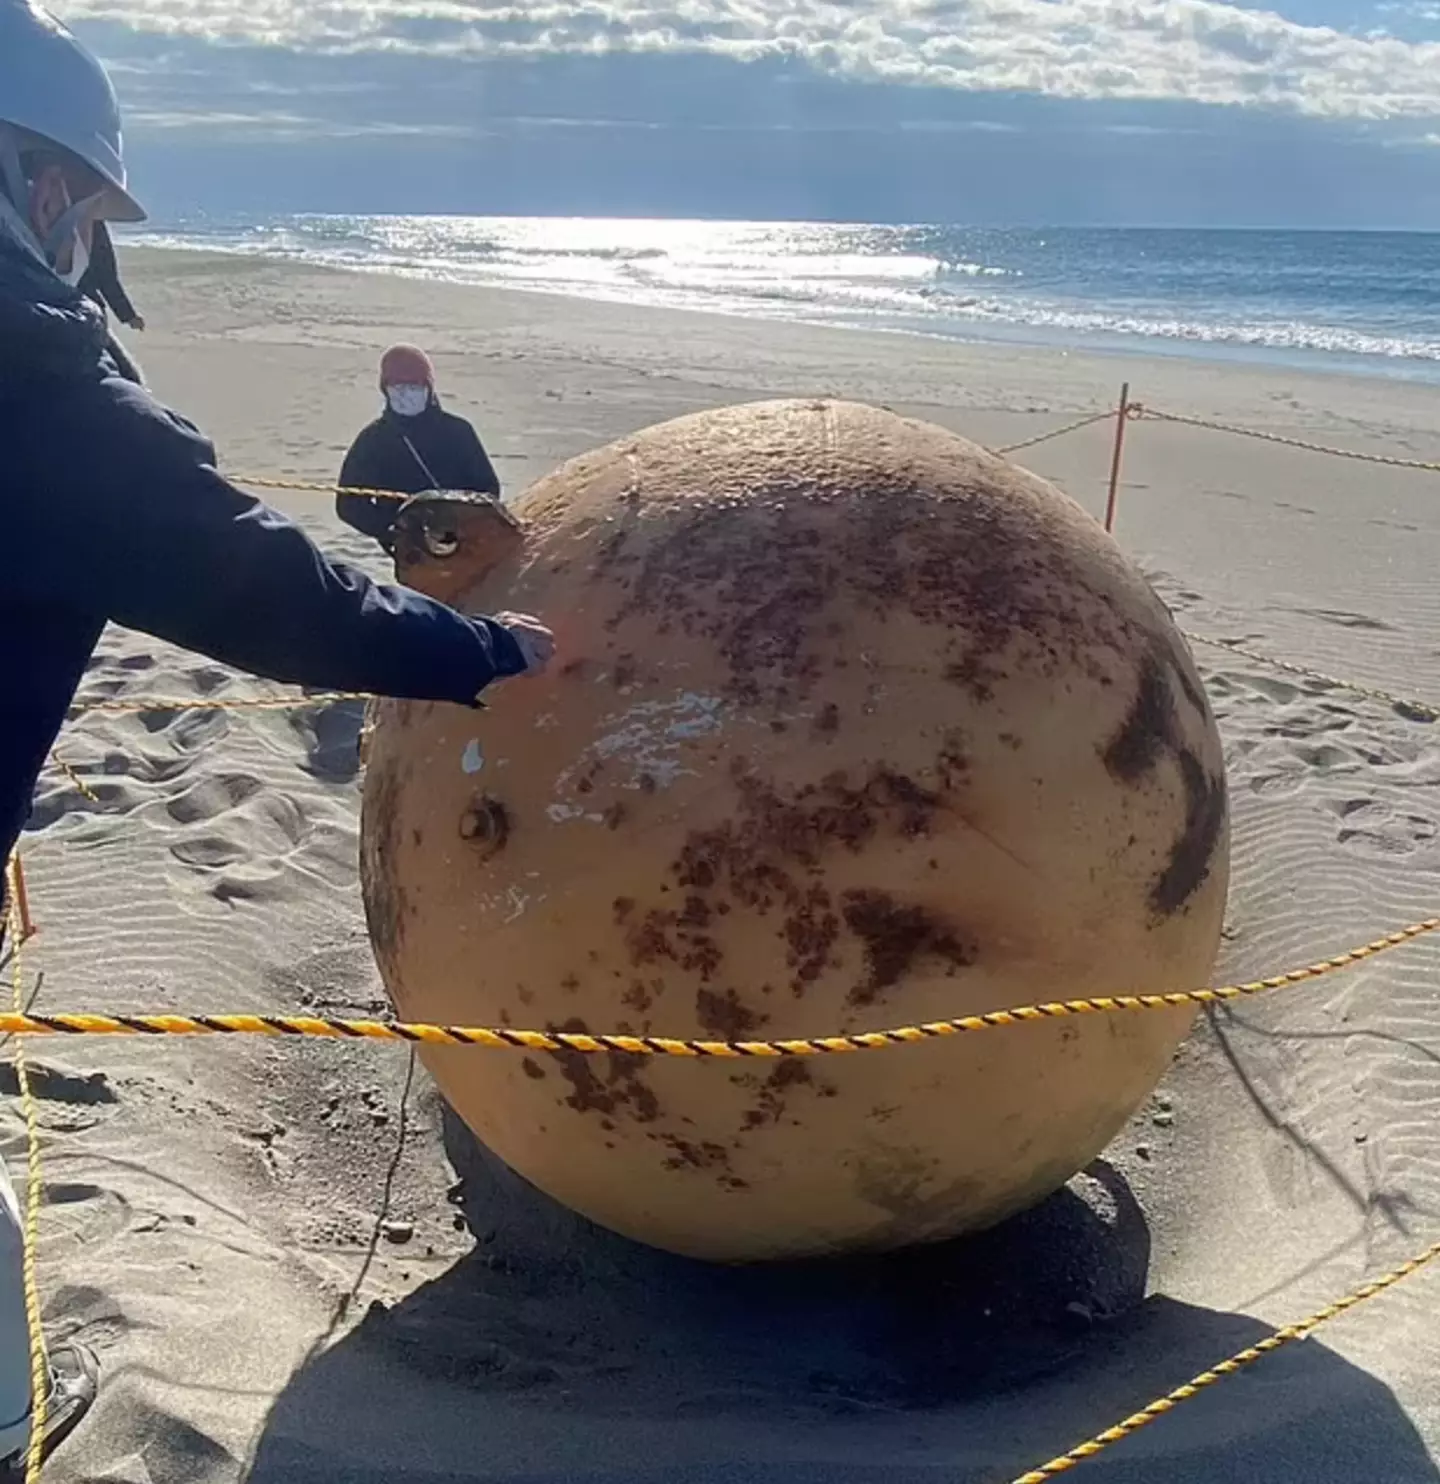 Disposal squads were enlisted to the beach with worries the ball could have been a sea mine.